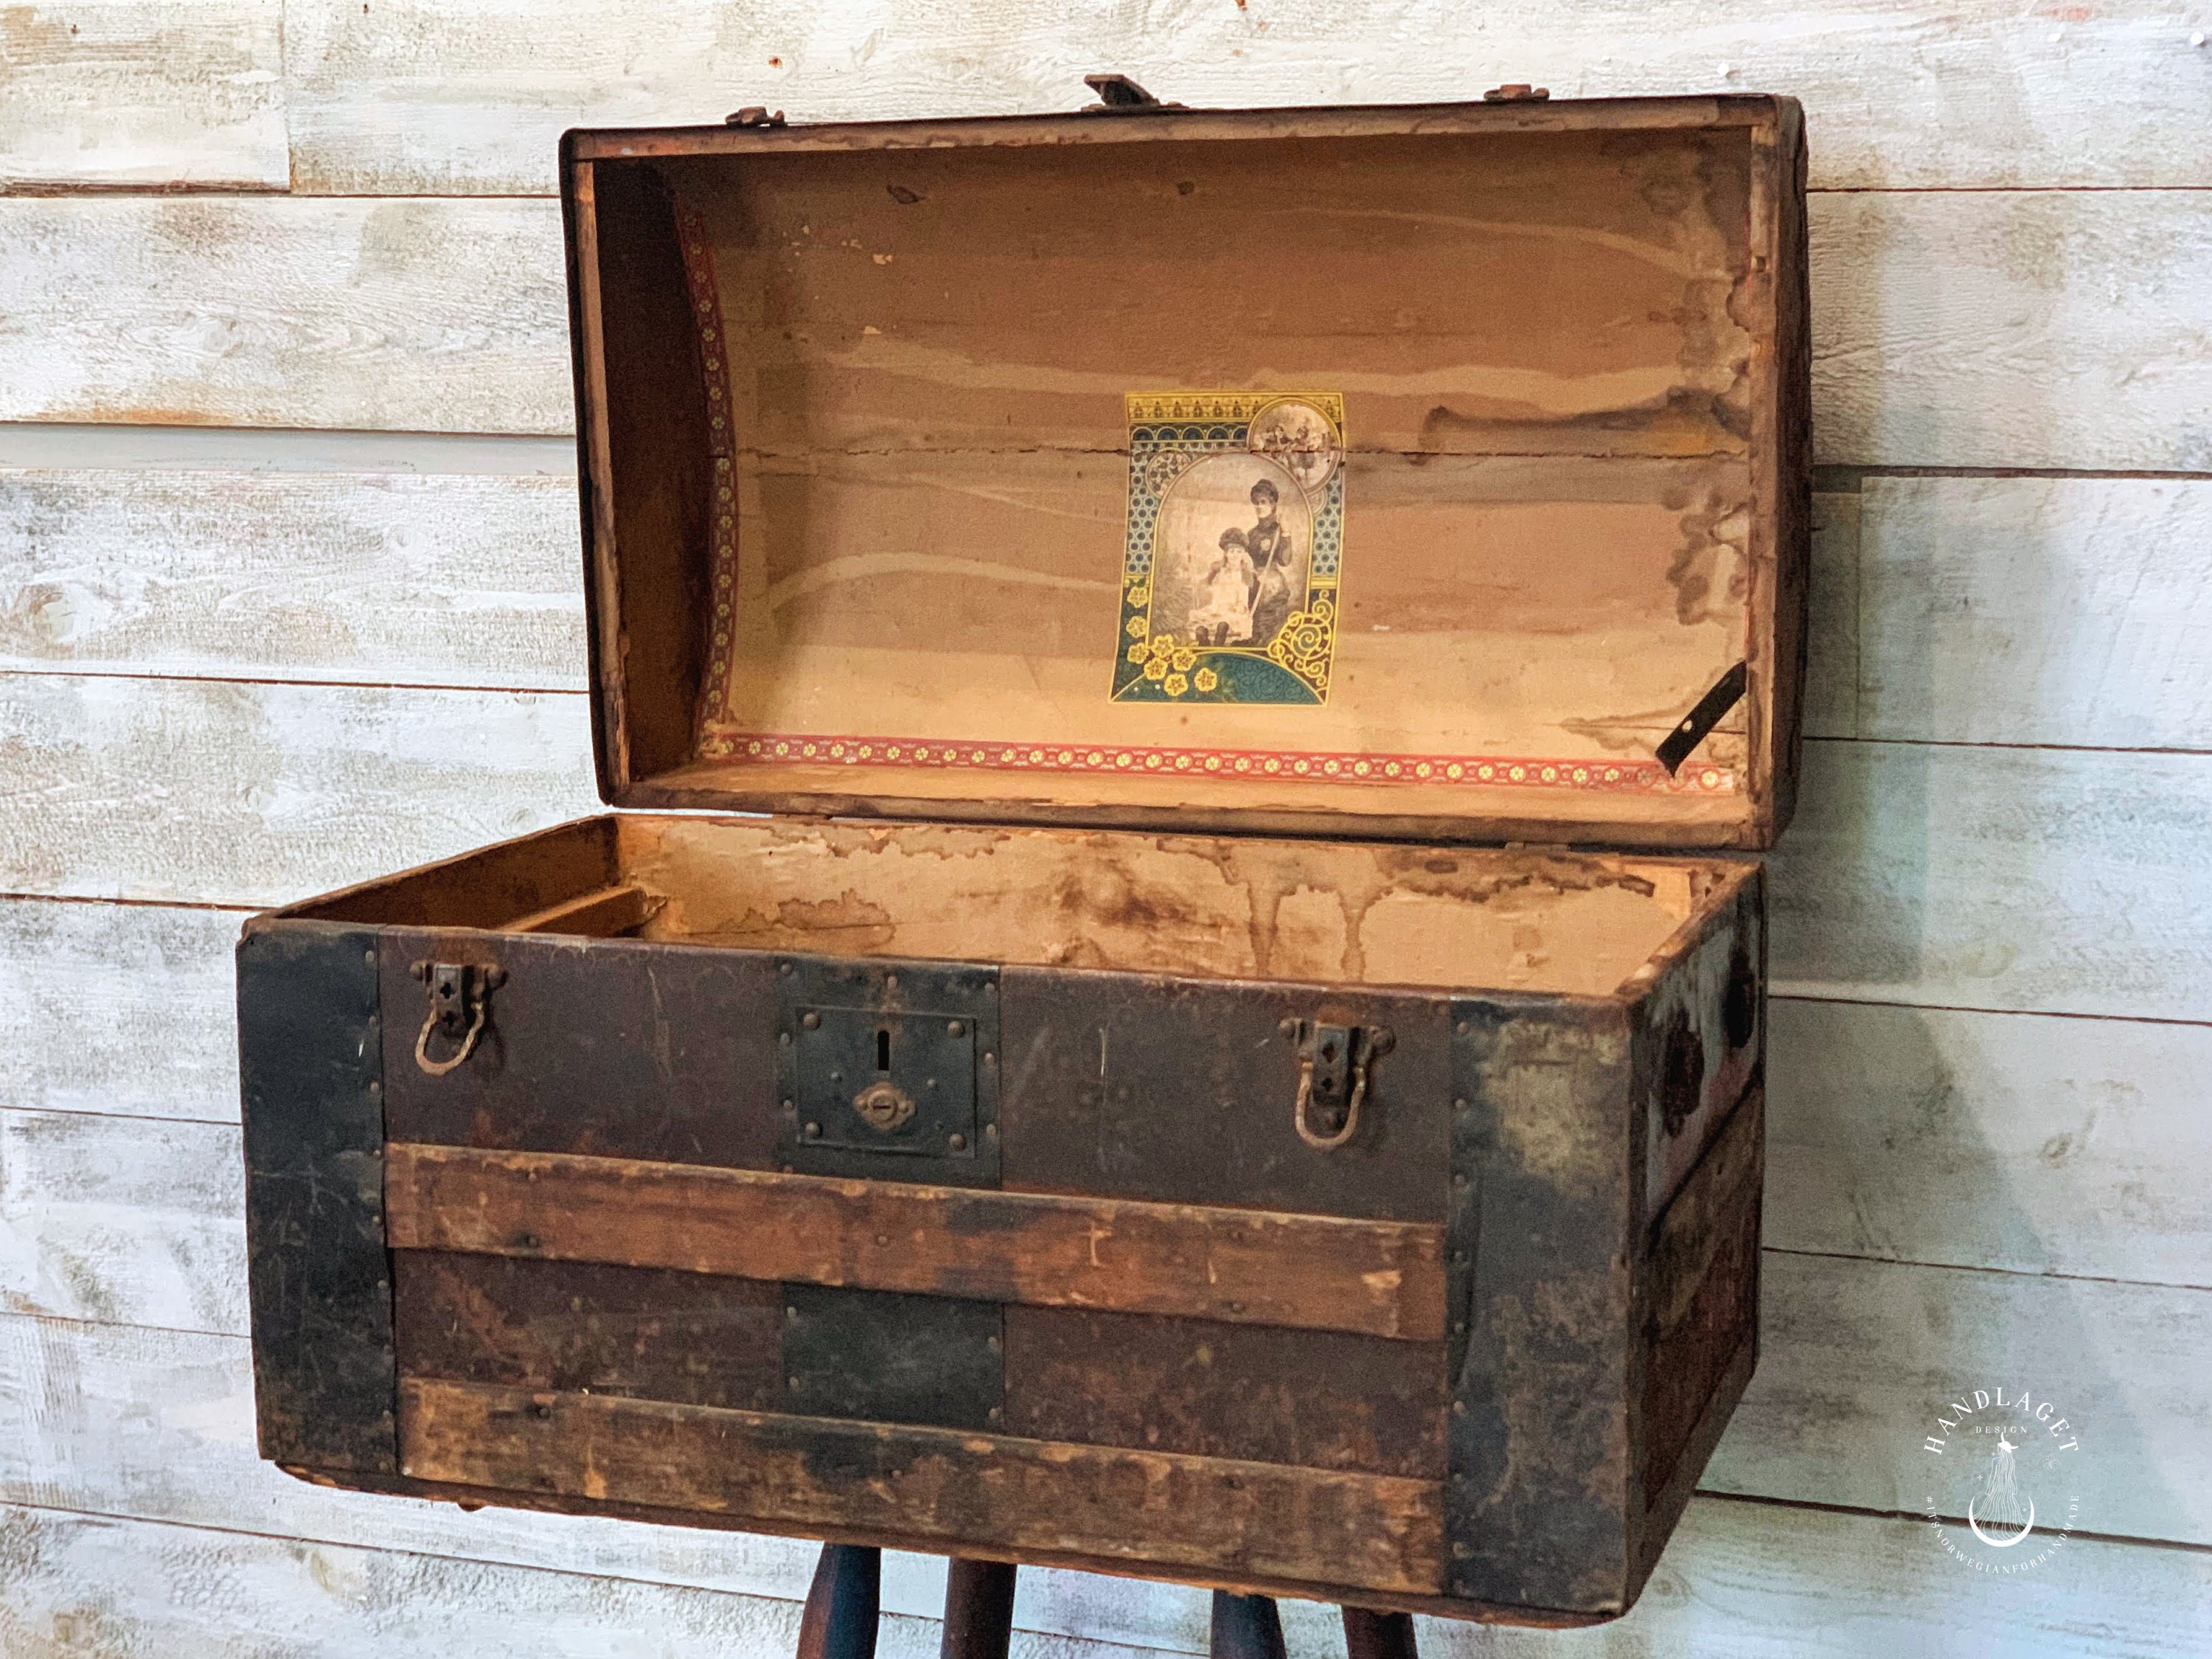 Antique Trunks: Identification and Value Guide  Antique trunk, Antique  steamer trunk, Antiques